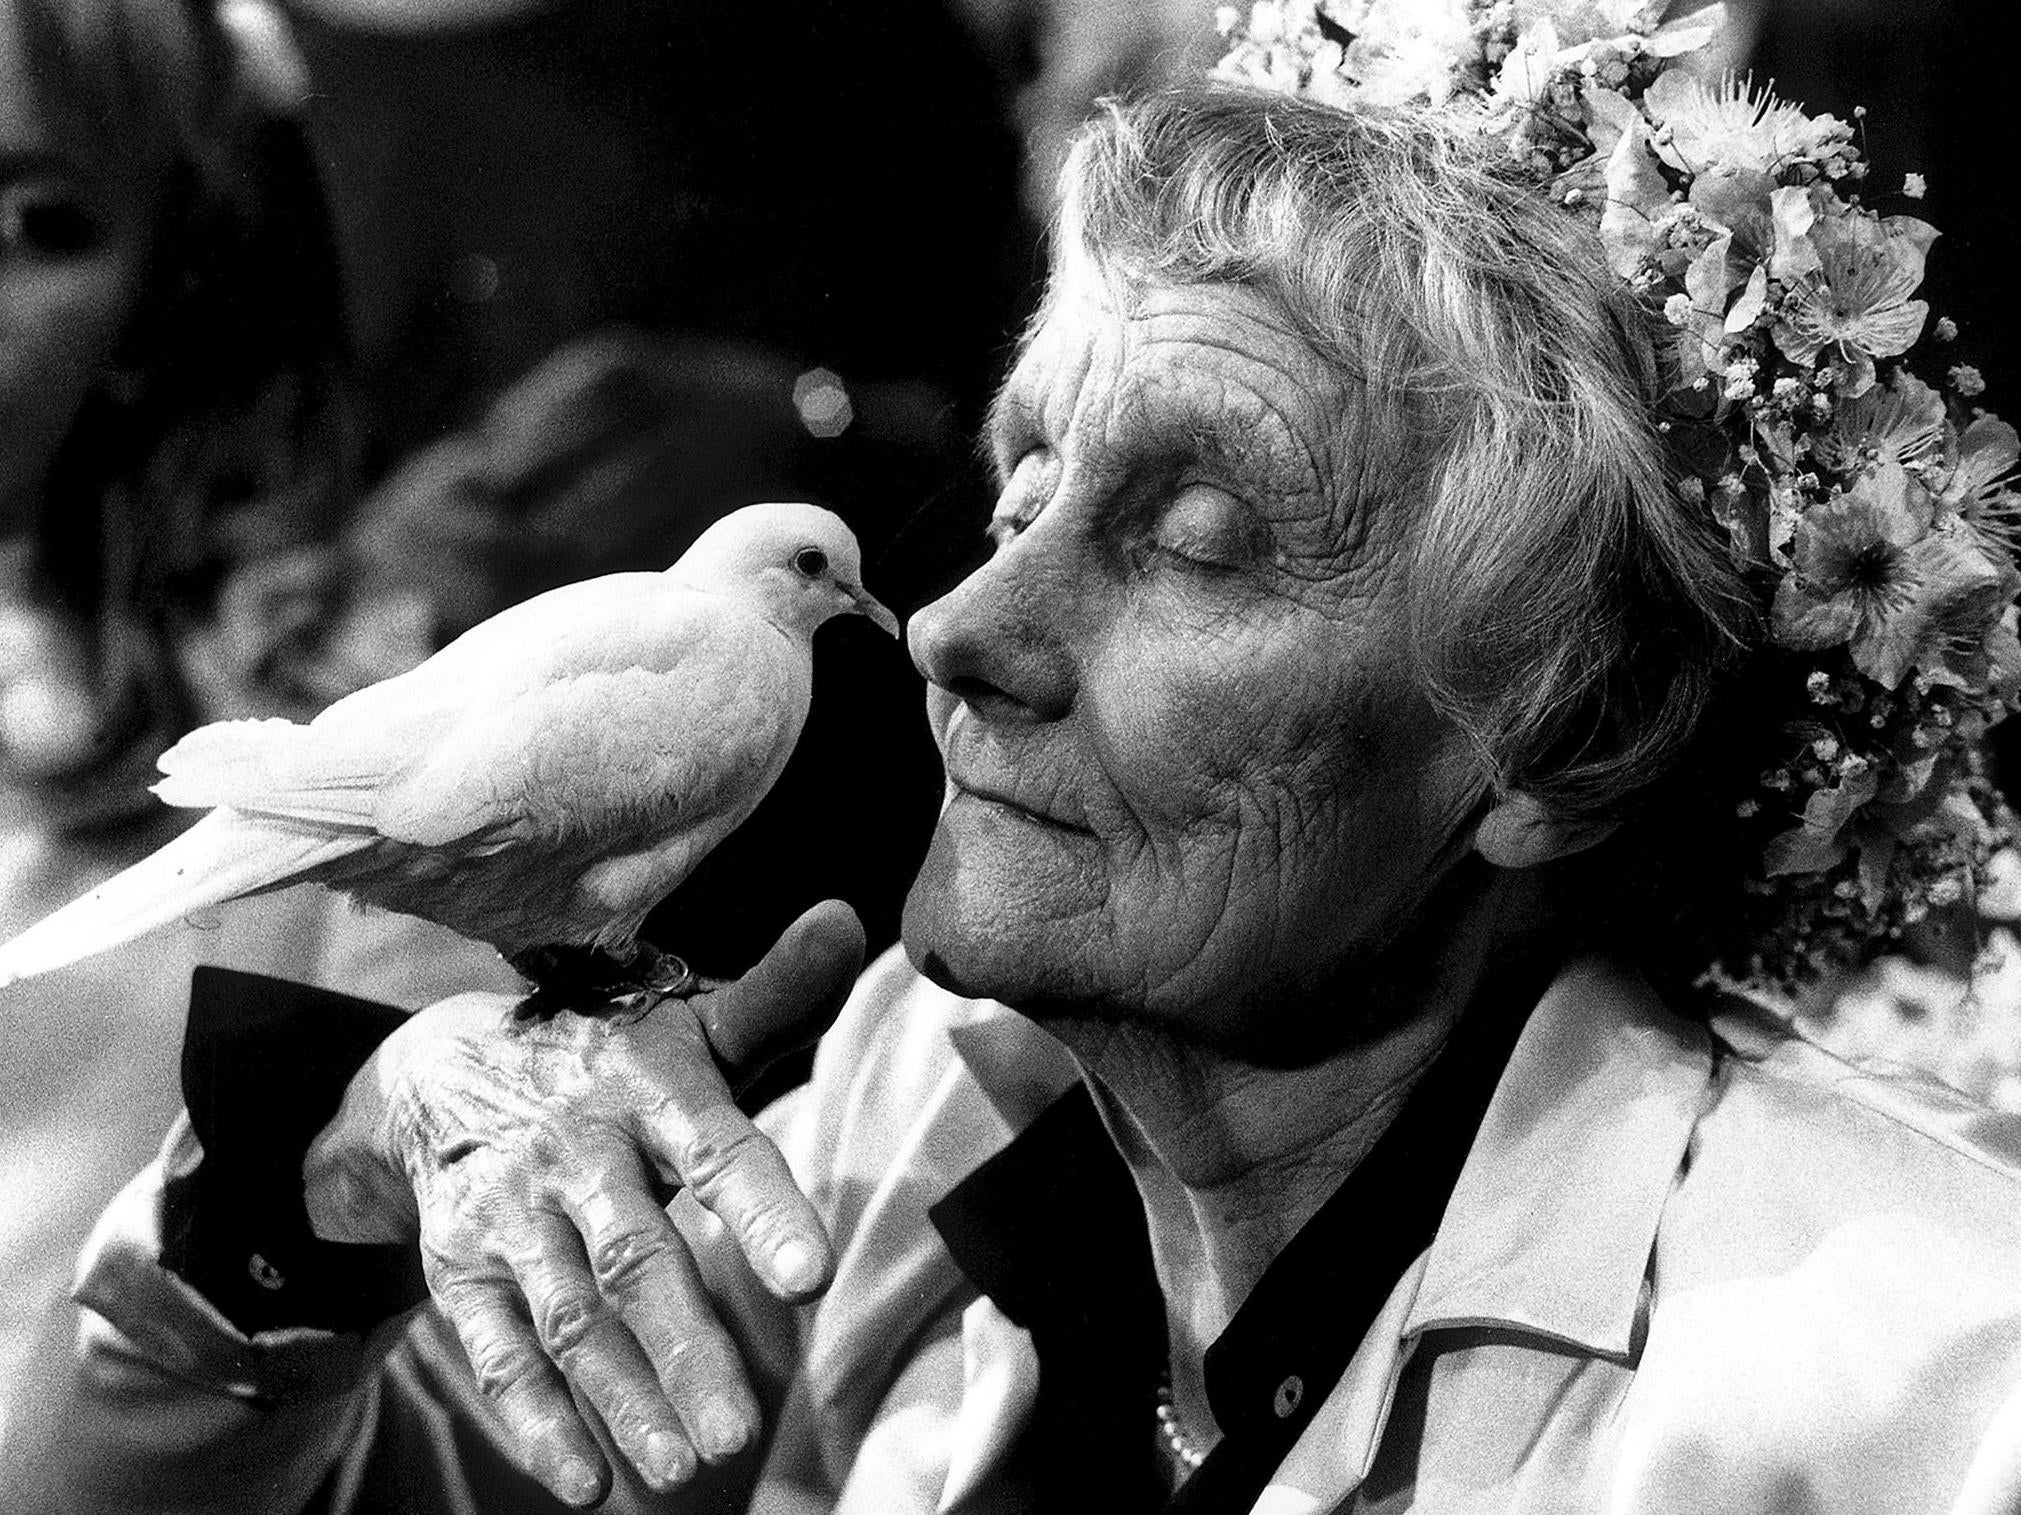 Astrid Lindgren, activist, journalist, mother and one of Sweden’s most widely translated authors, is still a beguiling paradox